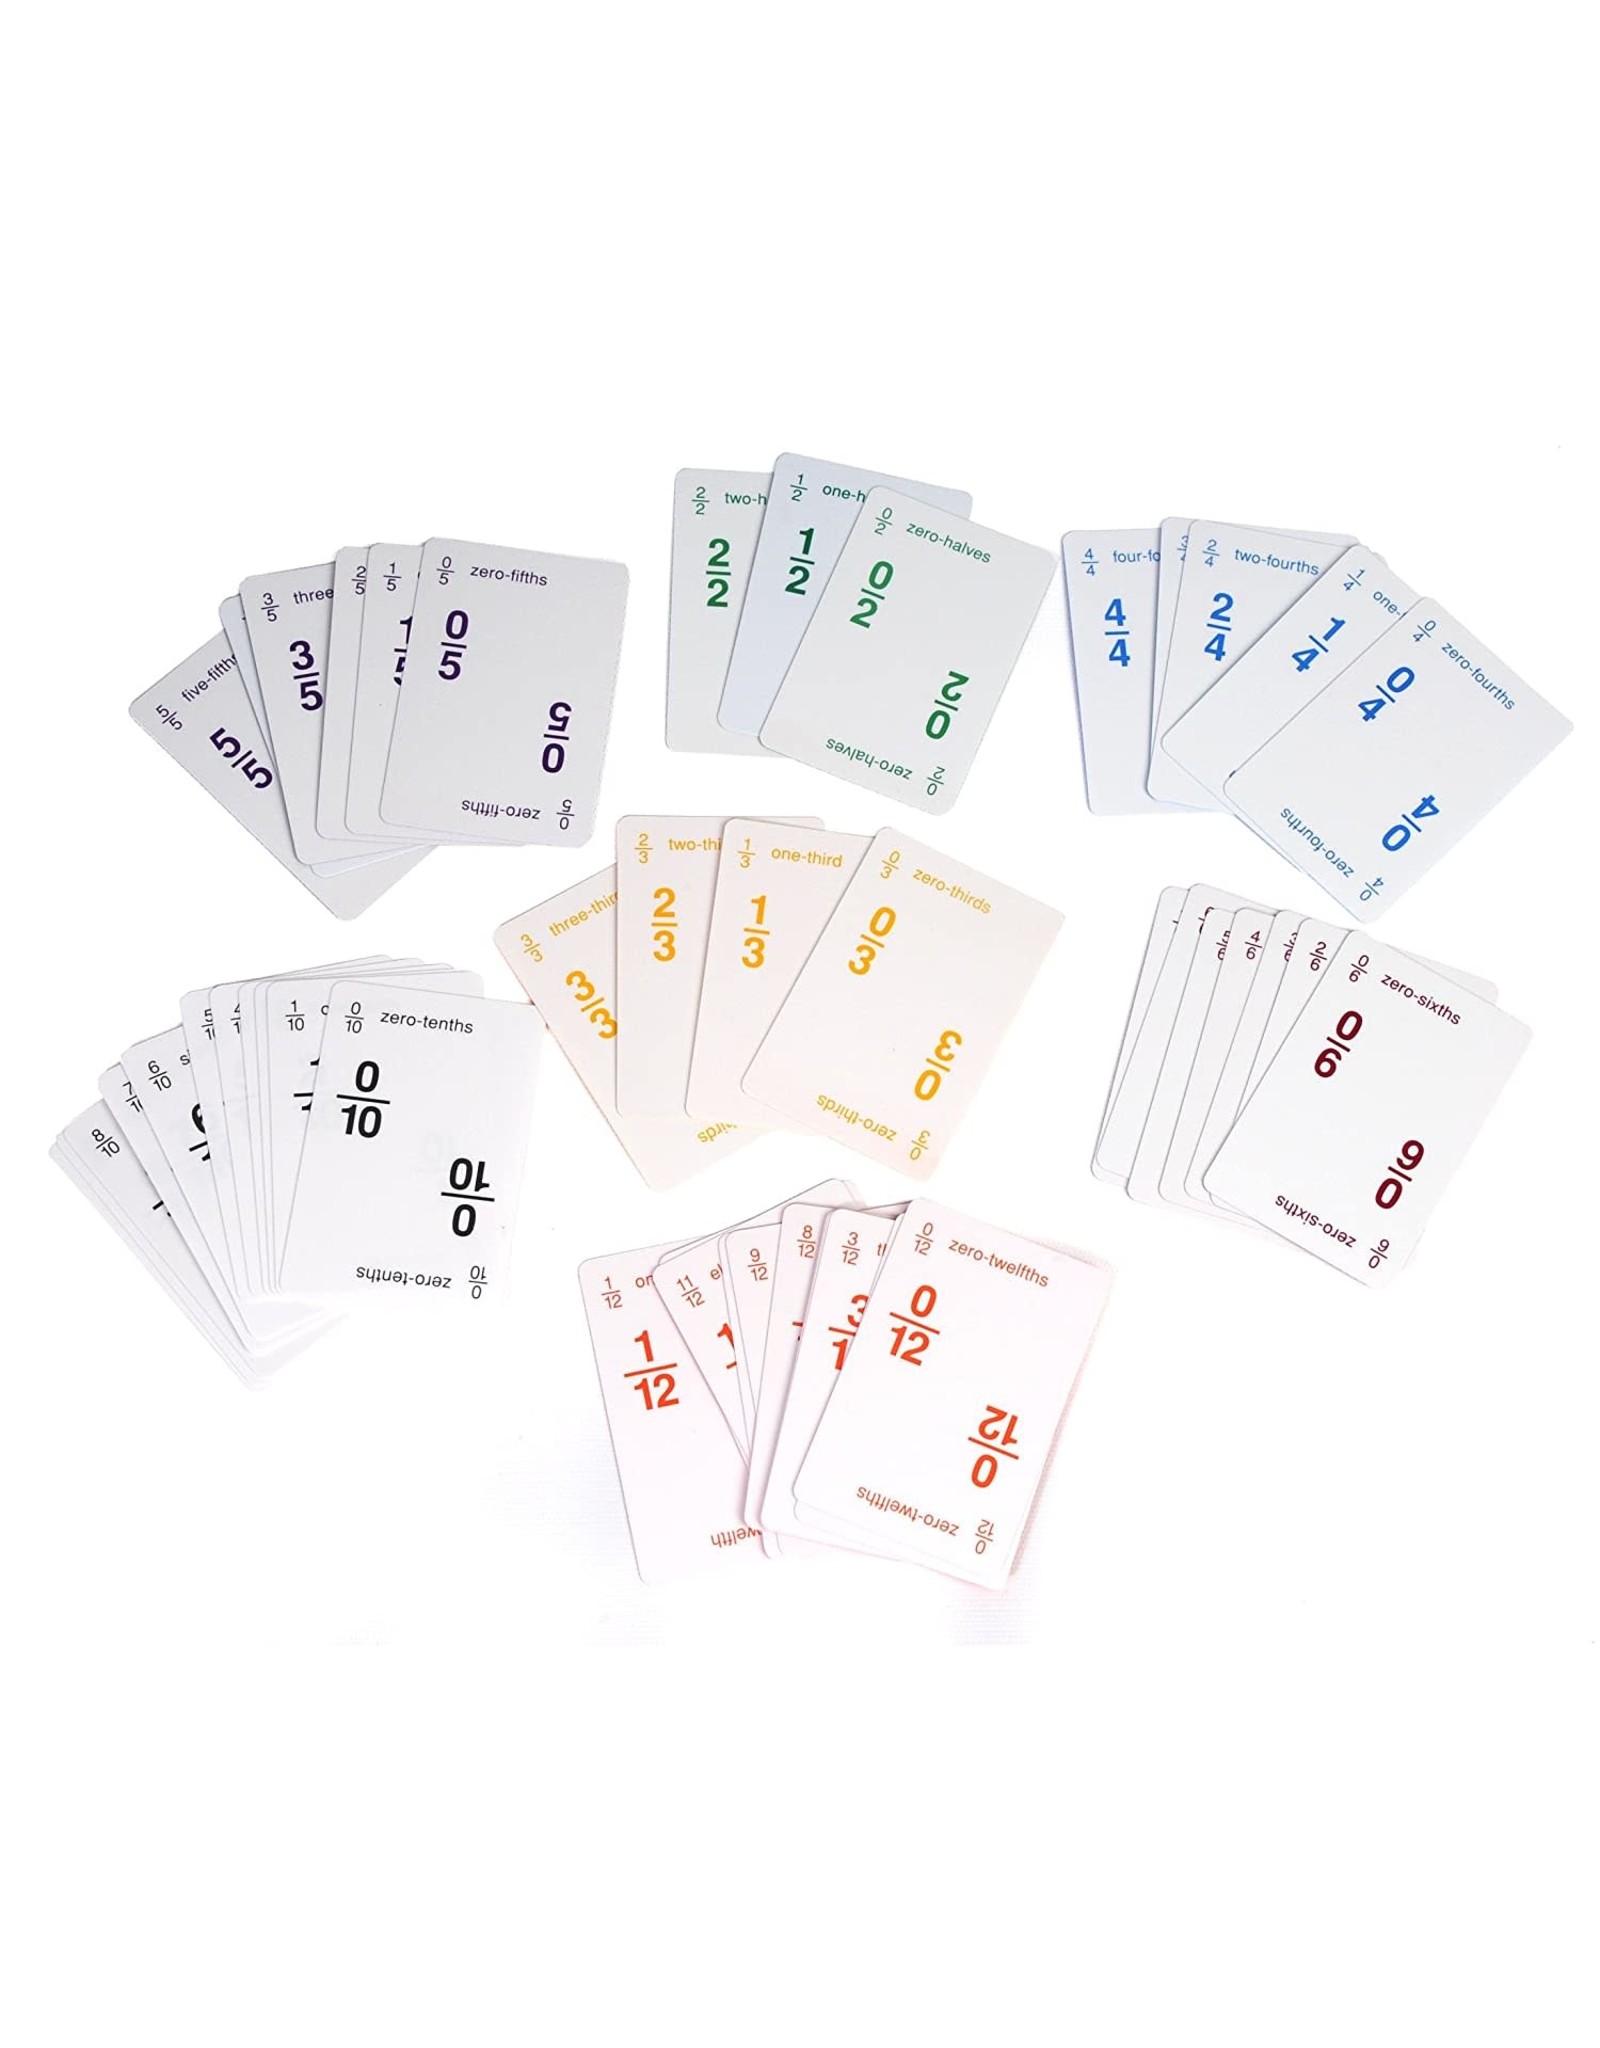 Fraction Bars Playing Cards